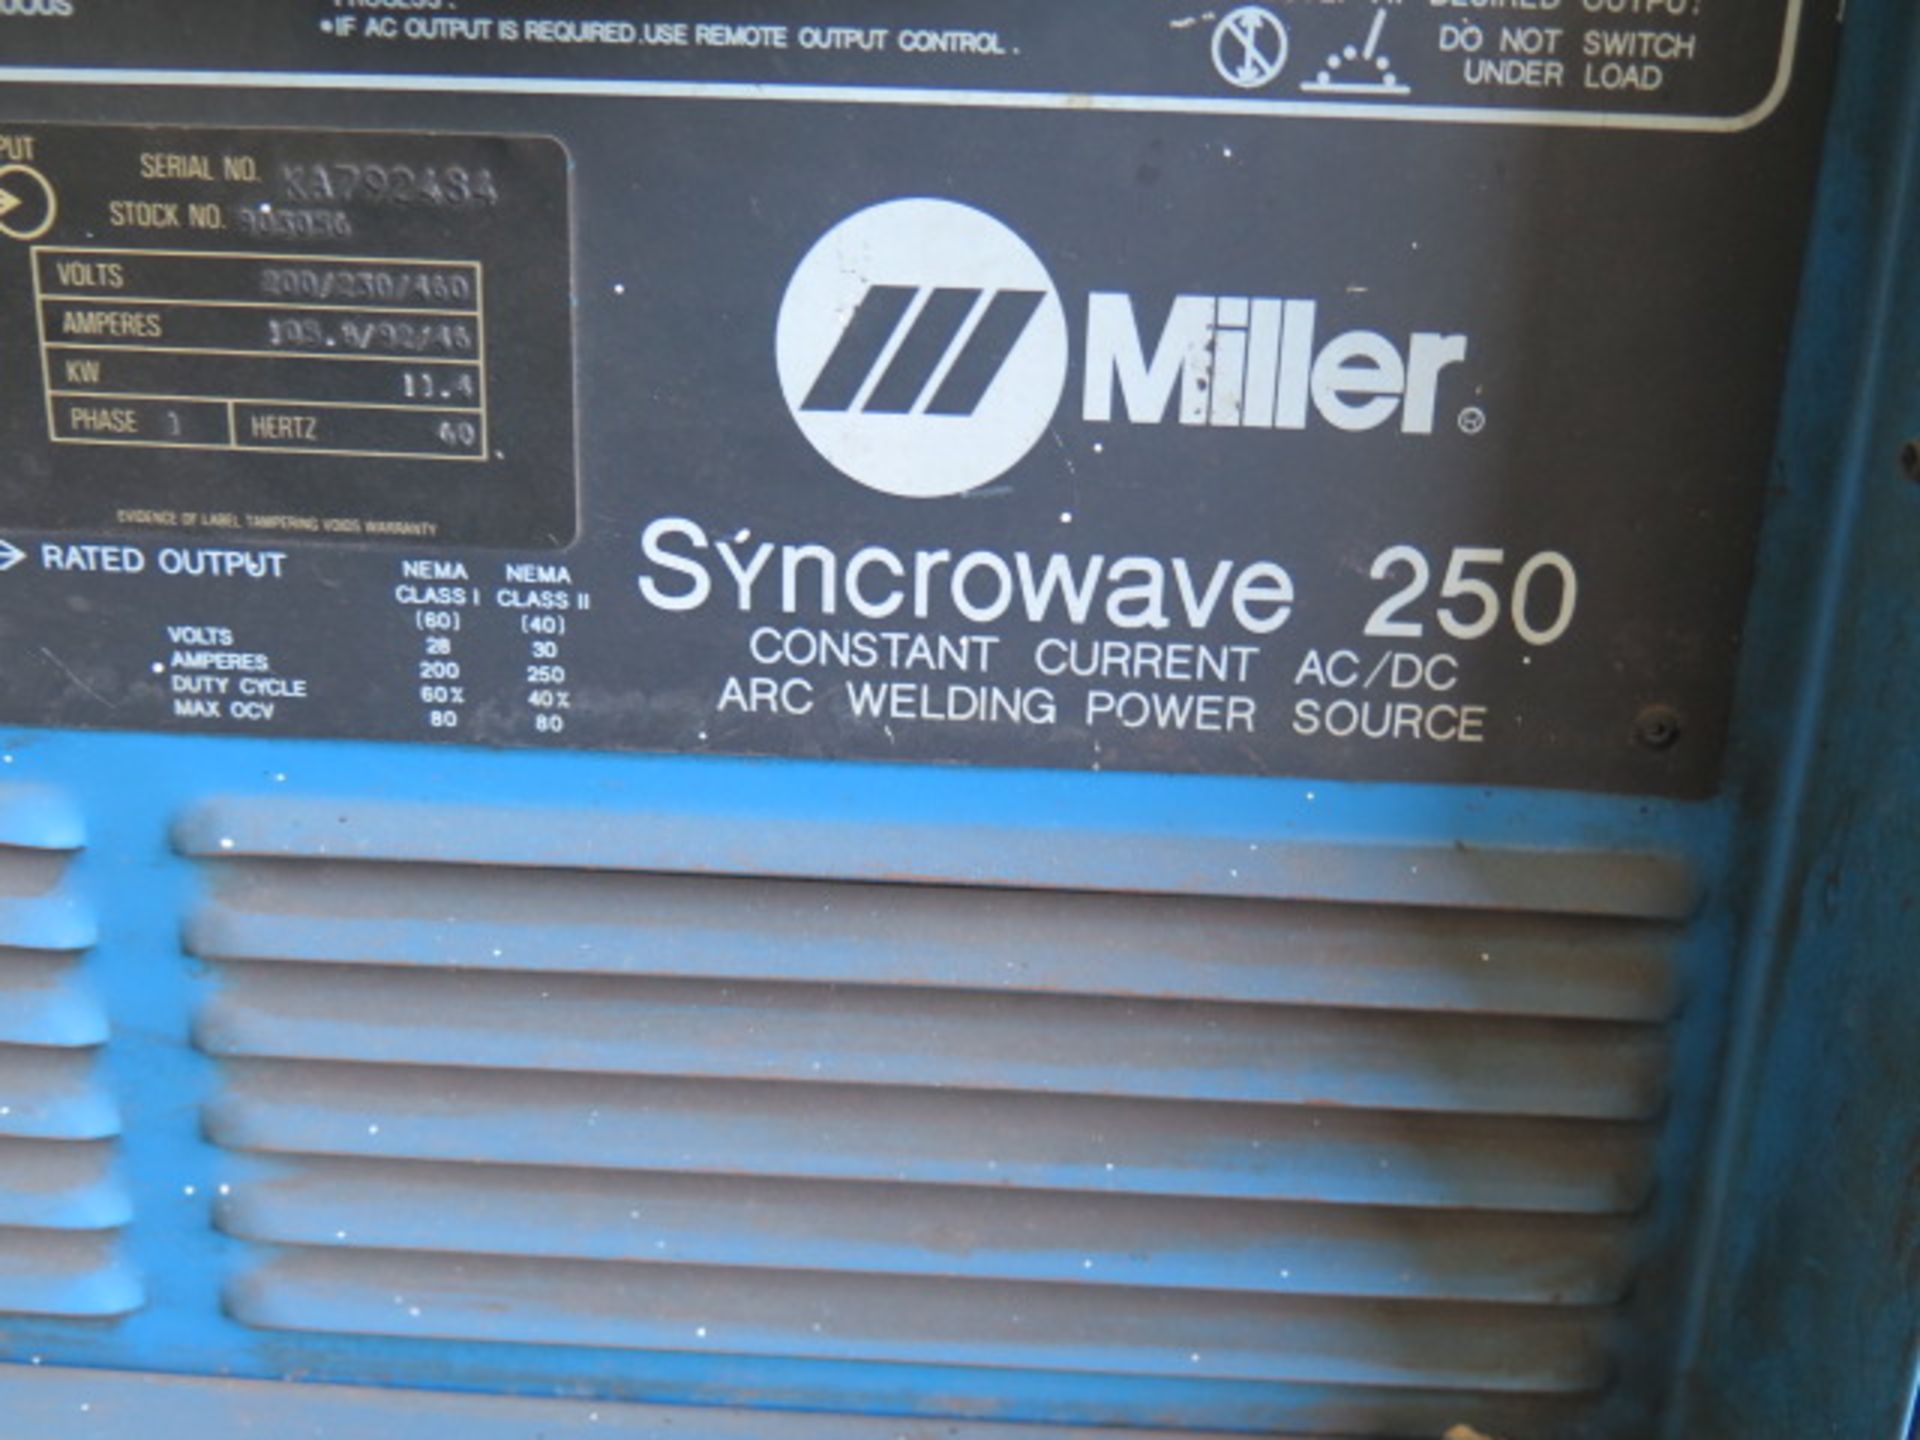 Miller Syncrowave 250 CC-AC/DC Arc Welding Power Source s/n KA792484 w/ Miller Cooler SOLD AS IS - Image 7 of 7